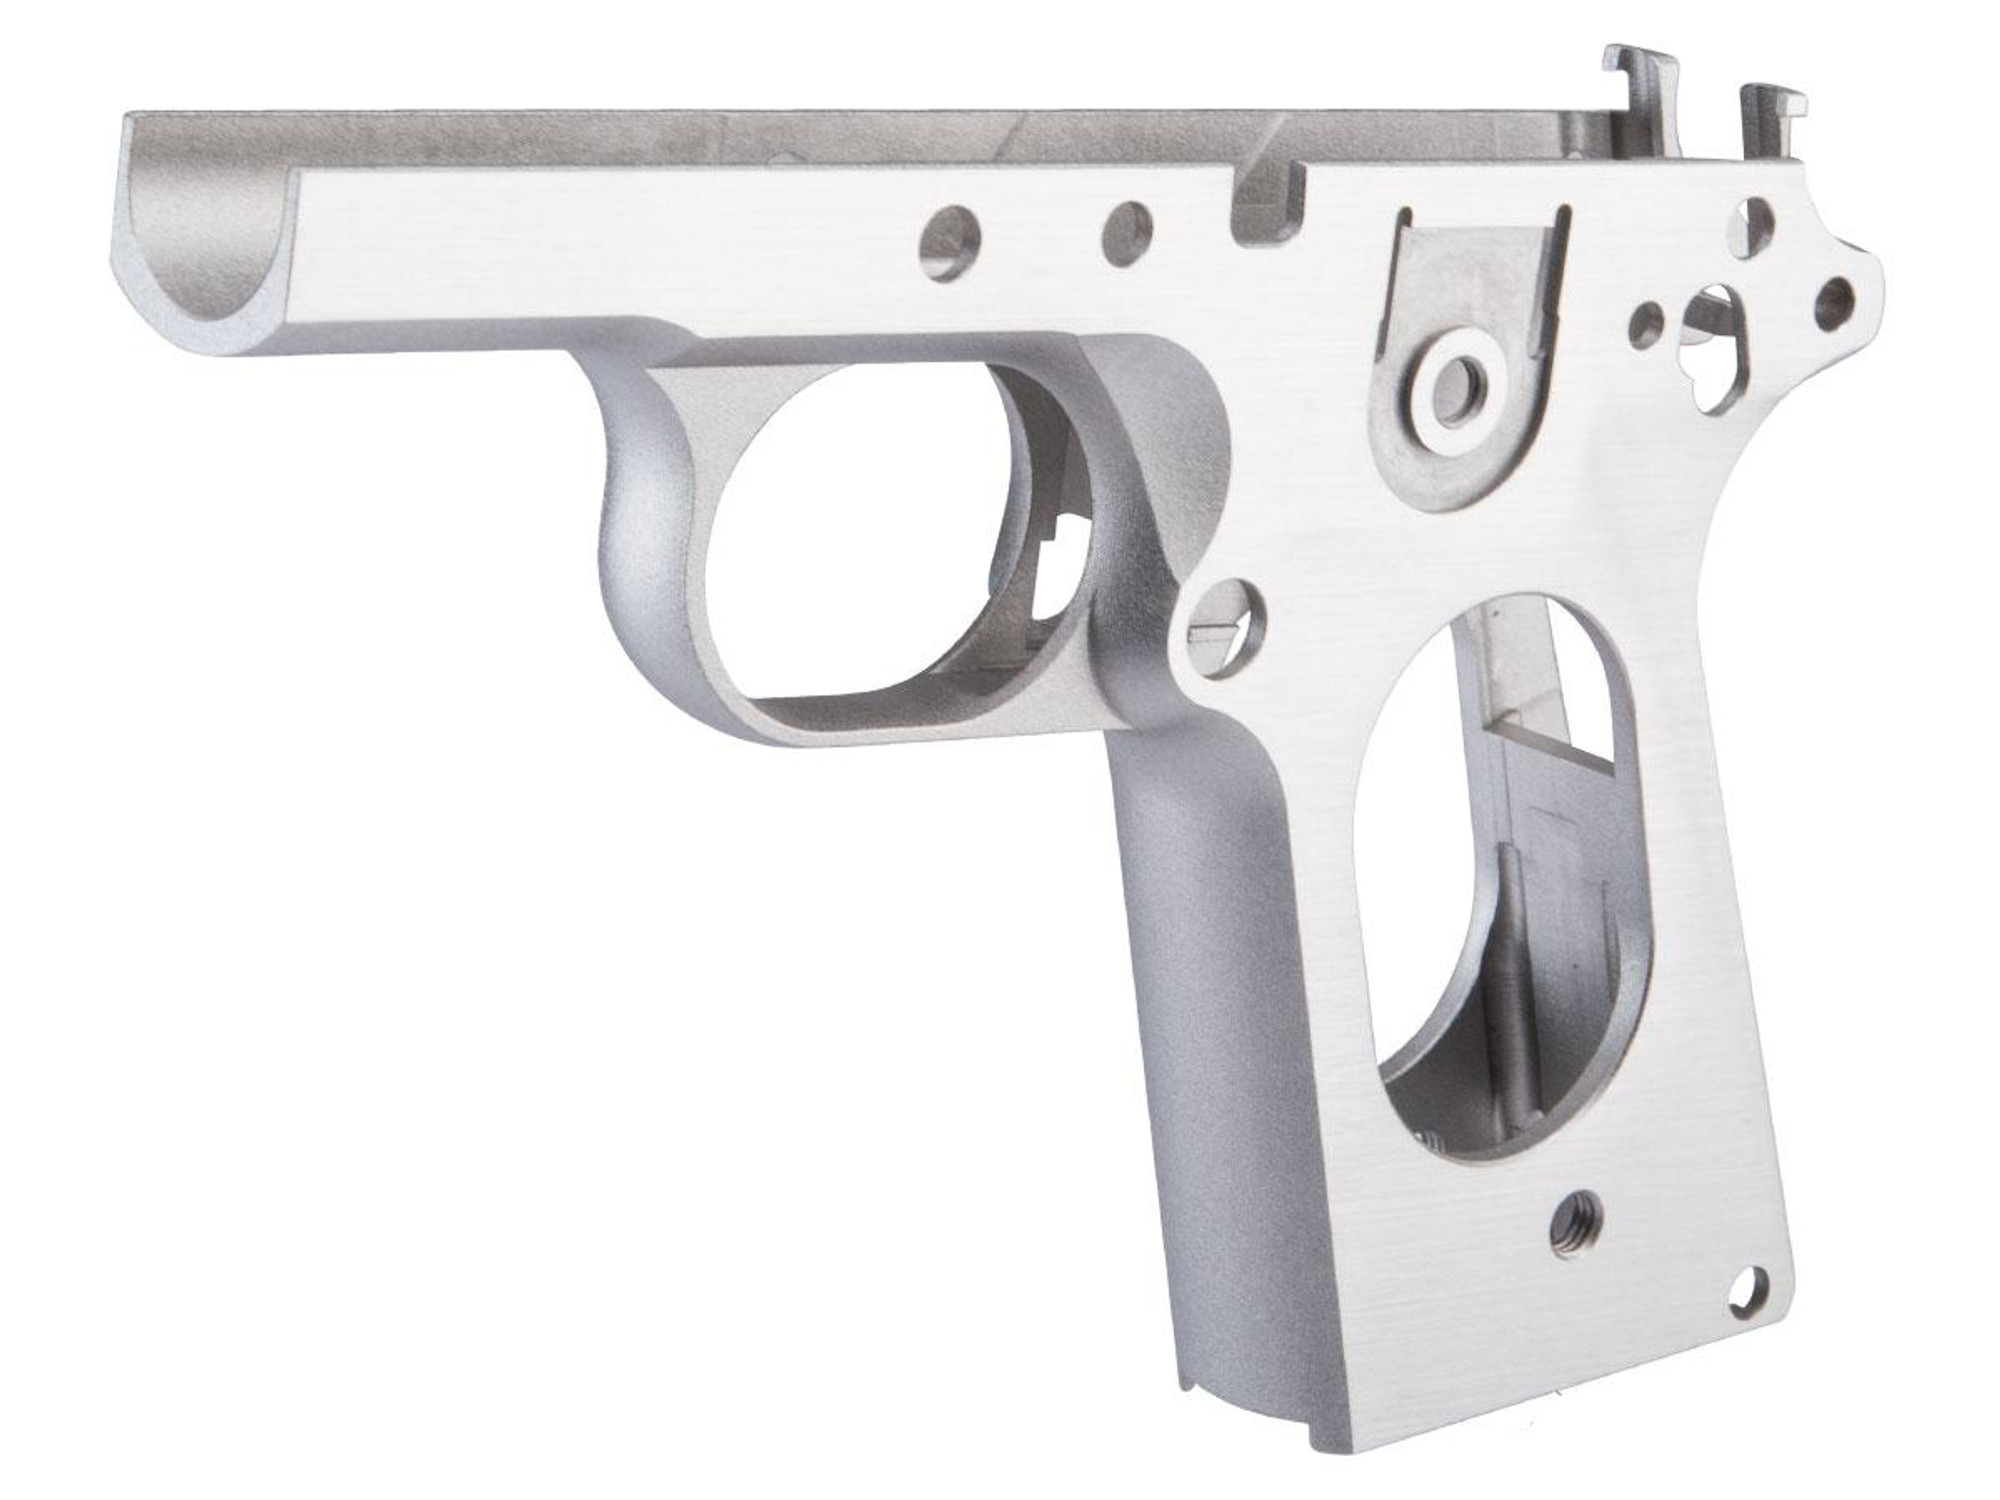 Guarder CNC Steel Frame for Tokyo Marui V10 Series Airsoft Gas Blowback Pistols (Color: Stainless)